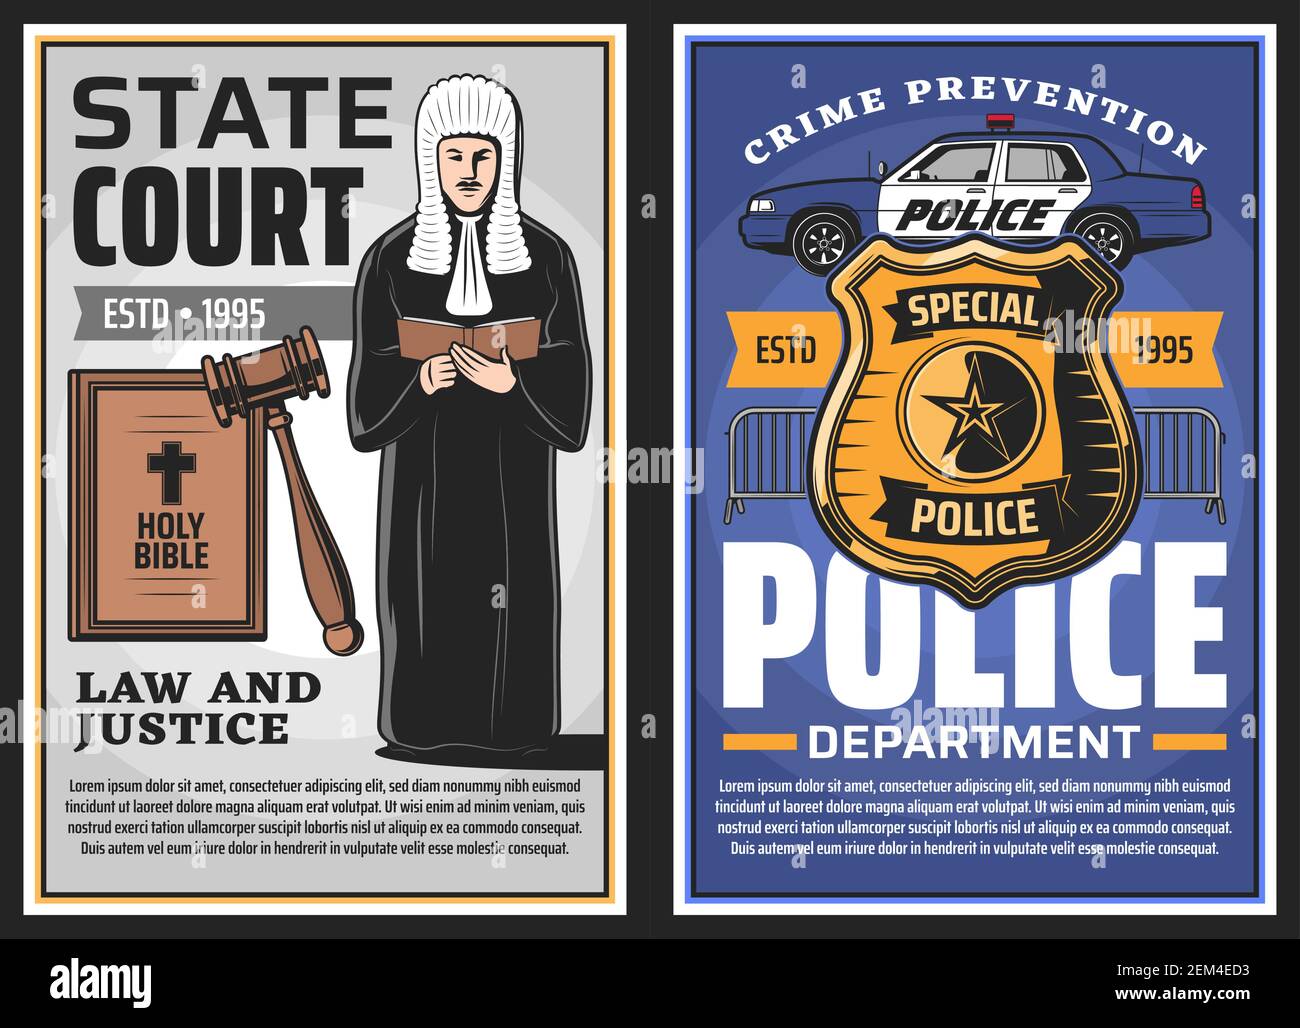 Police department and state court, law enforcement and justice vector design. Judge with gavel and law book, policeman car and officer badge with star Stock Vector